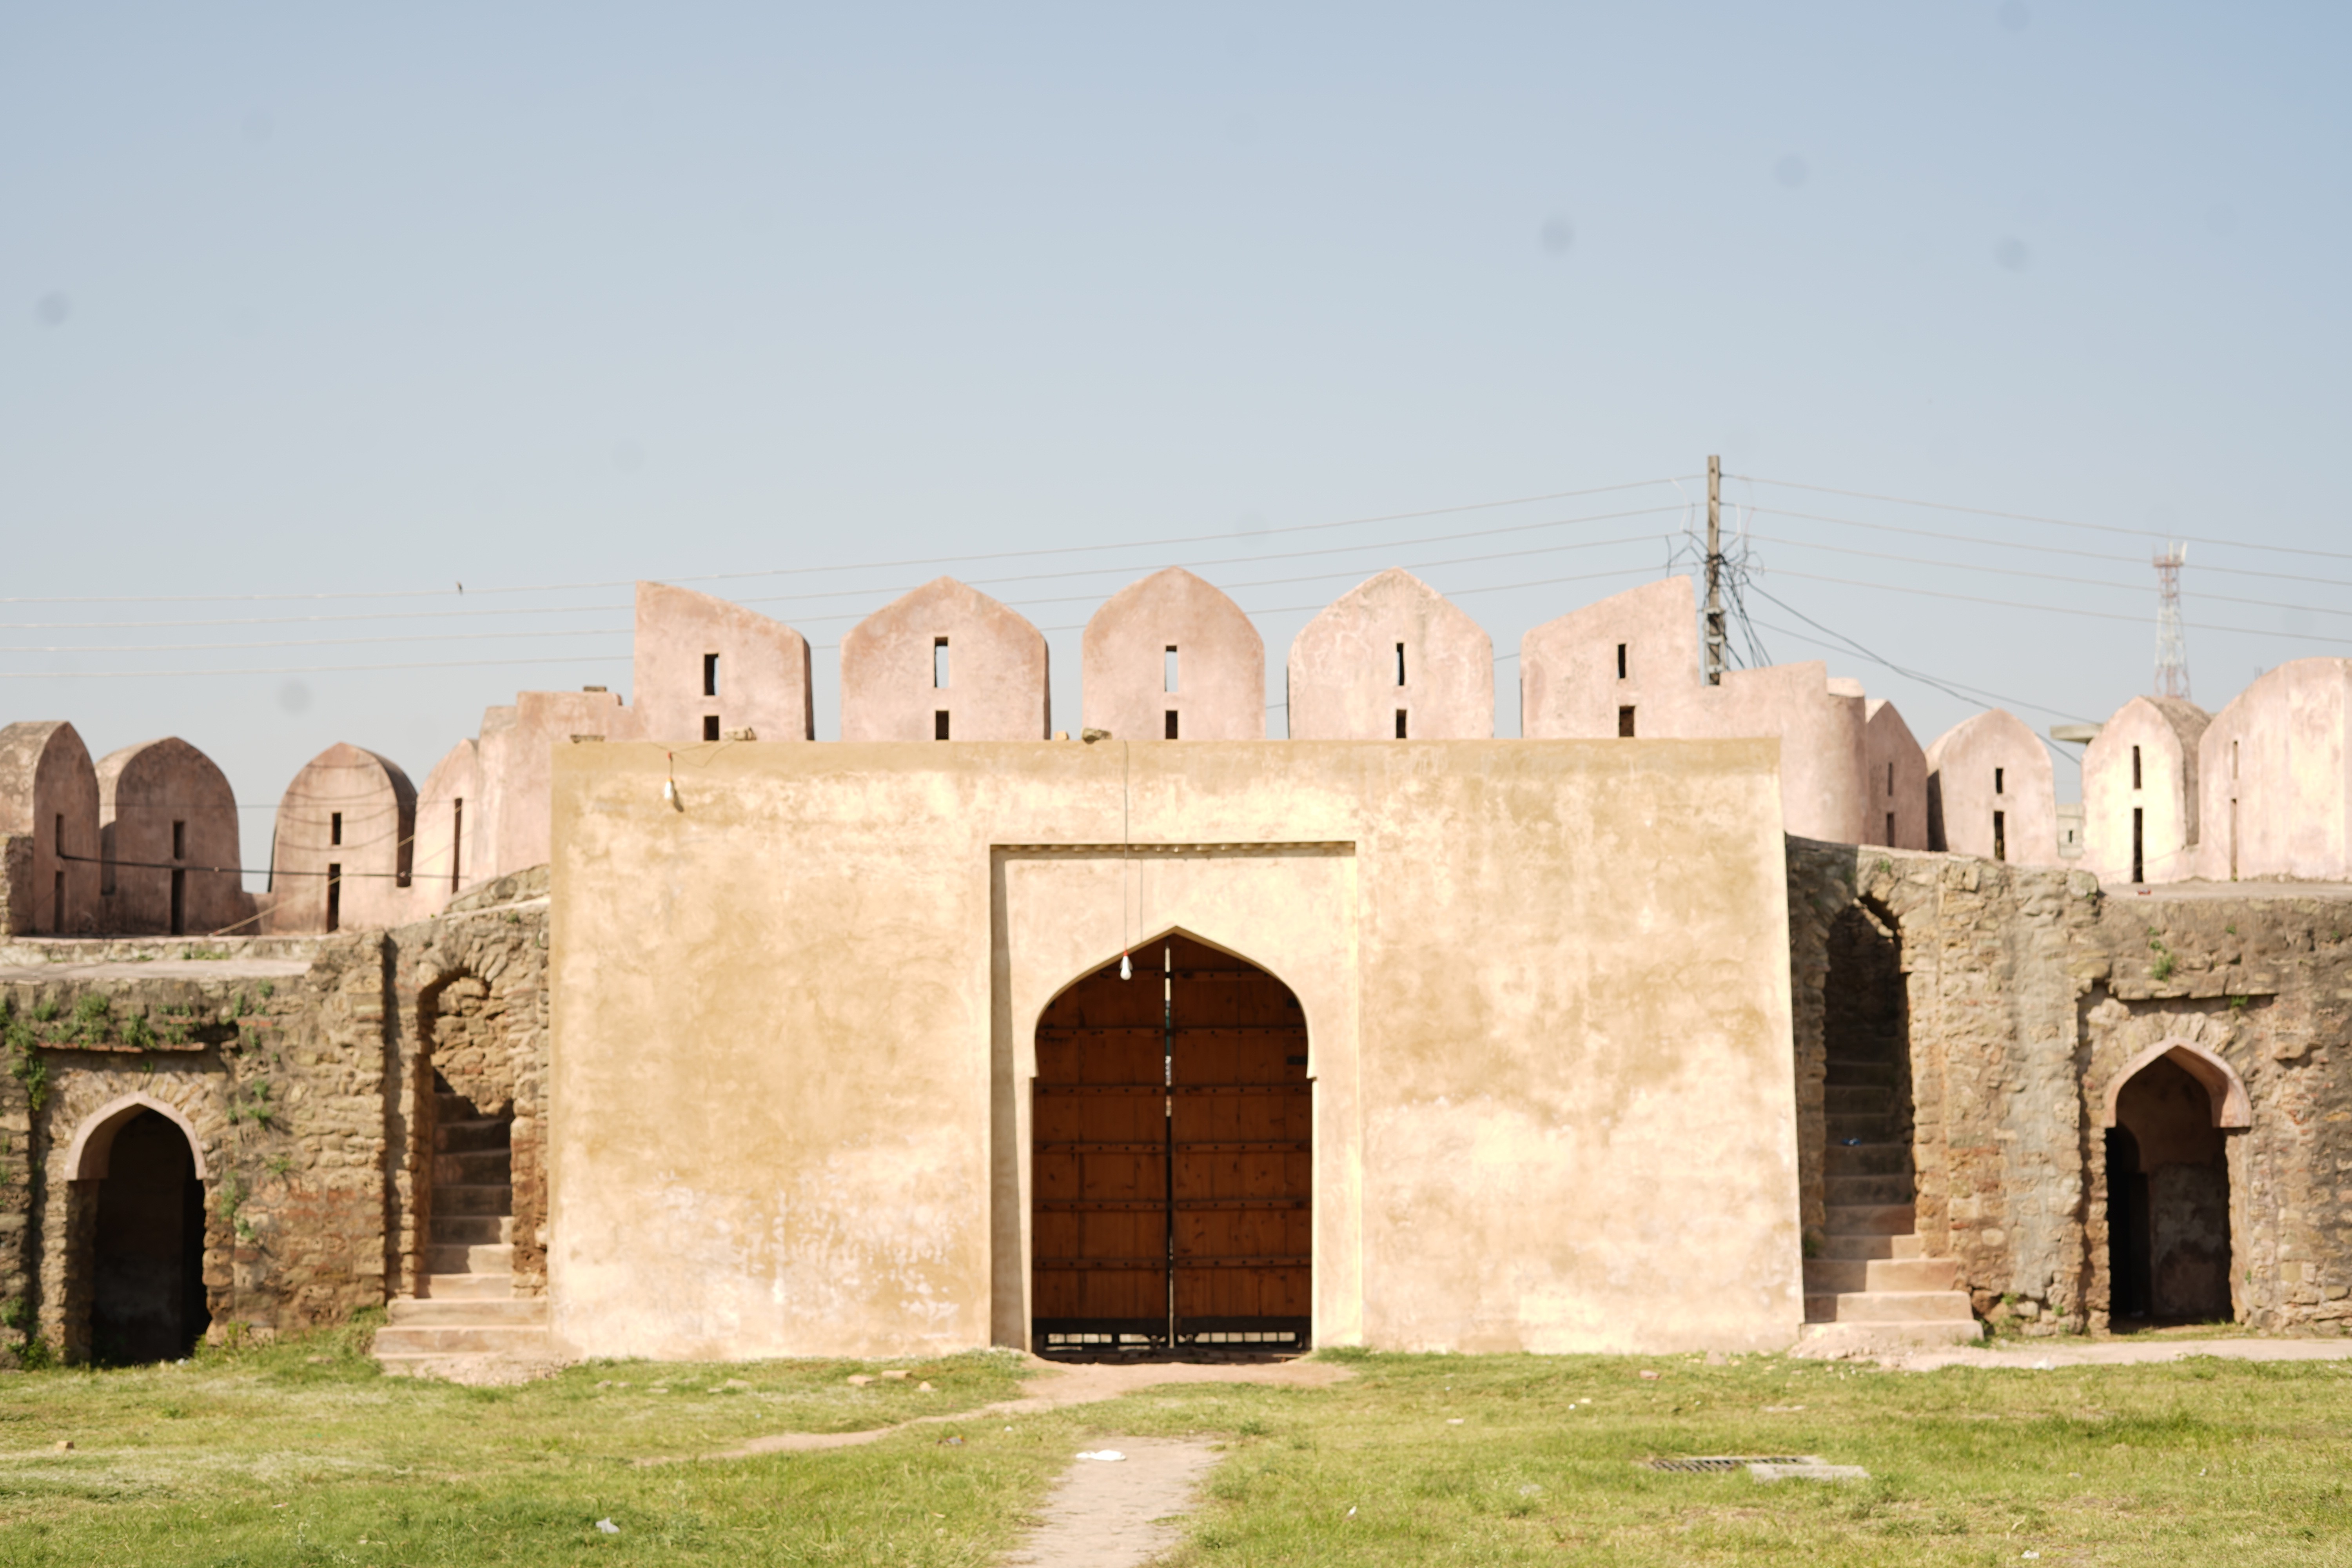 The entrance point of the fort